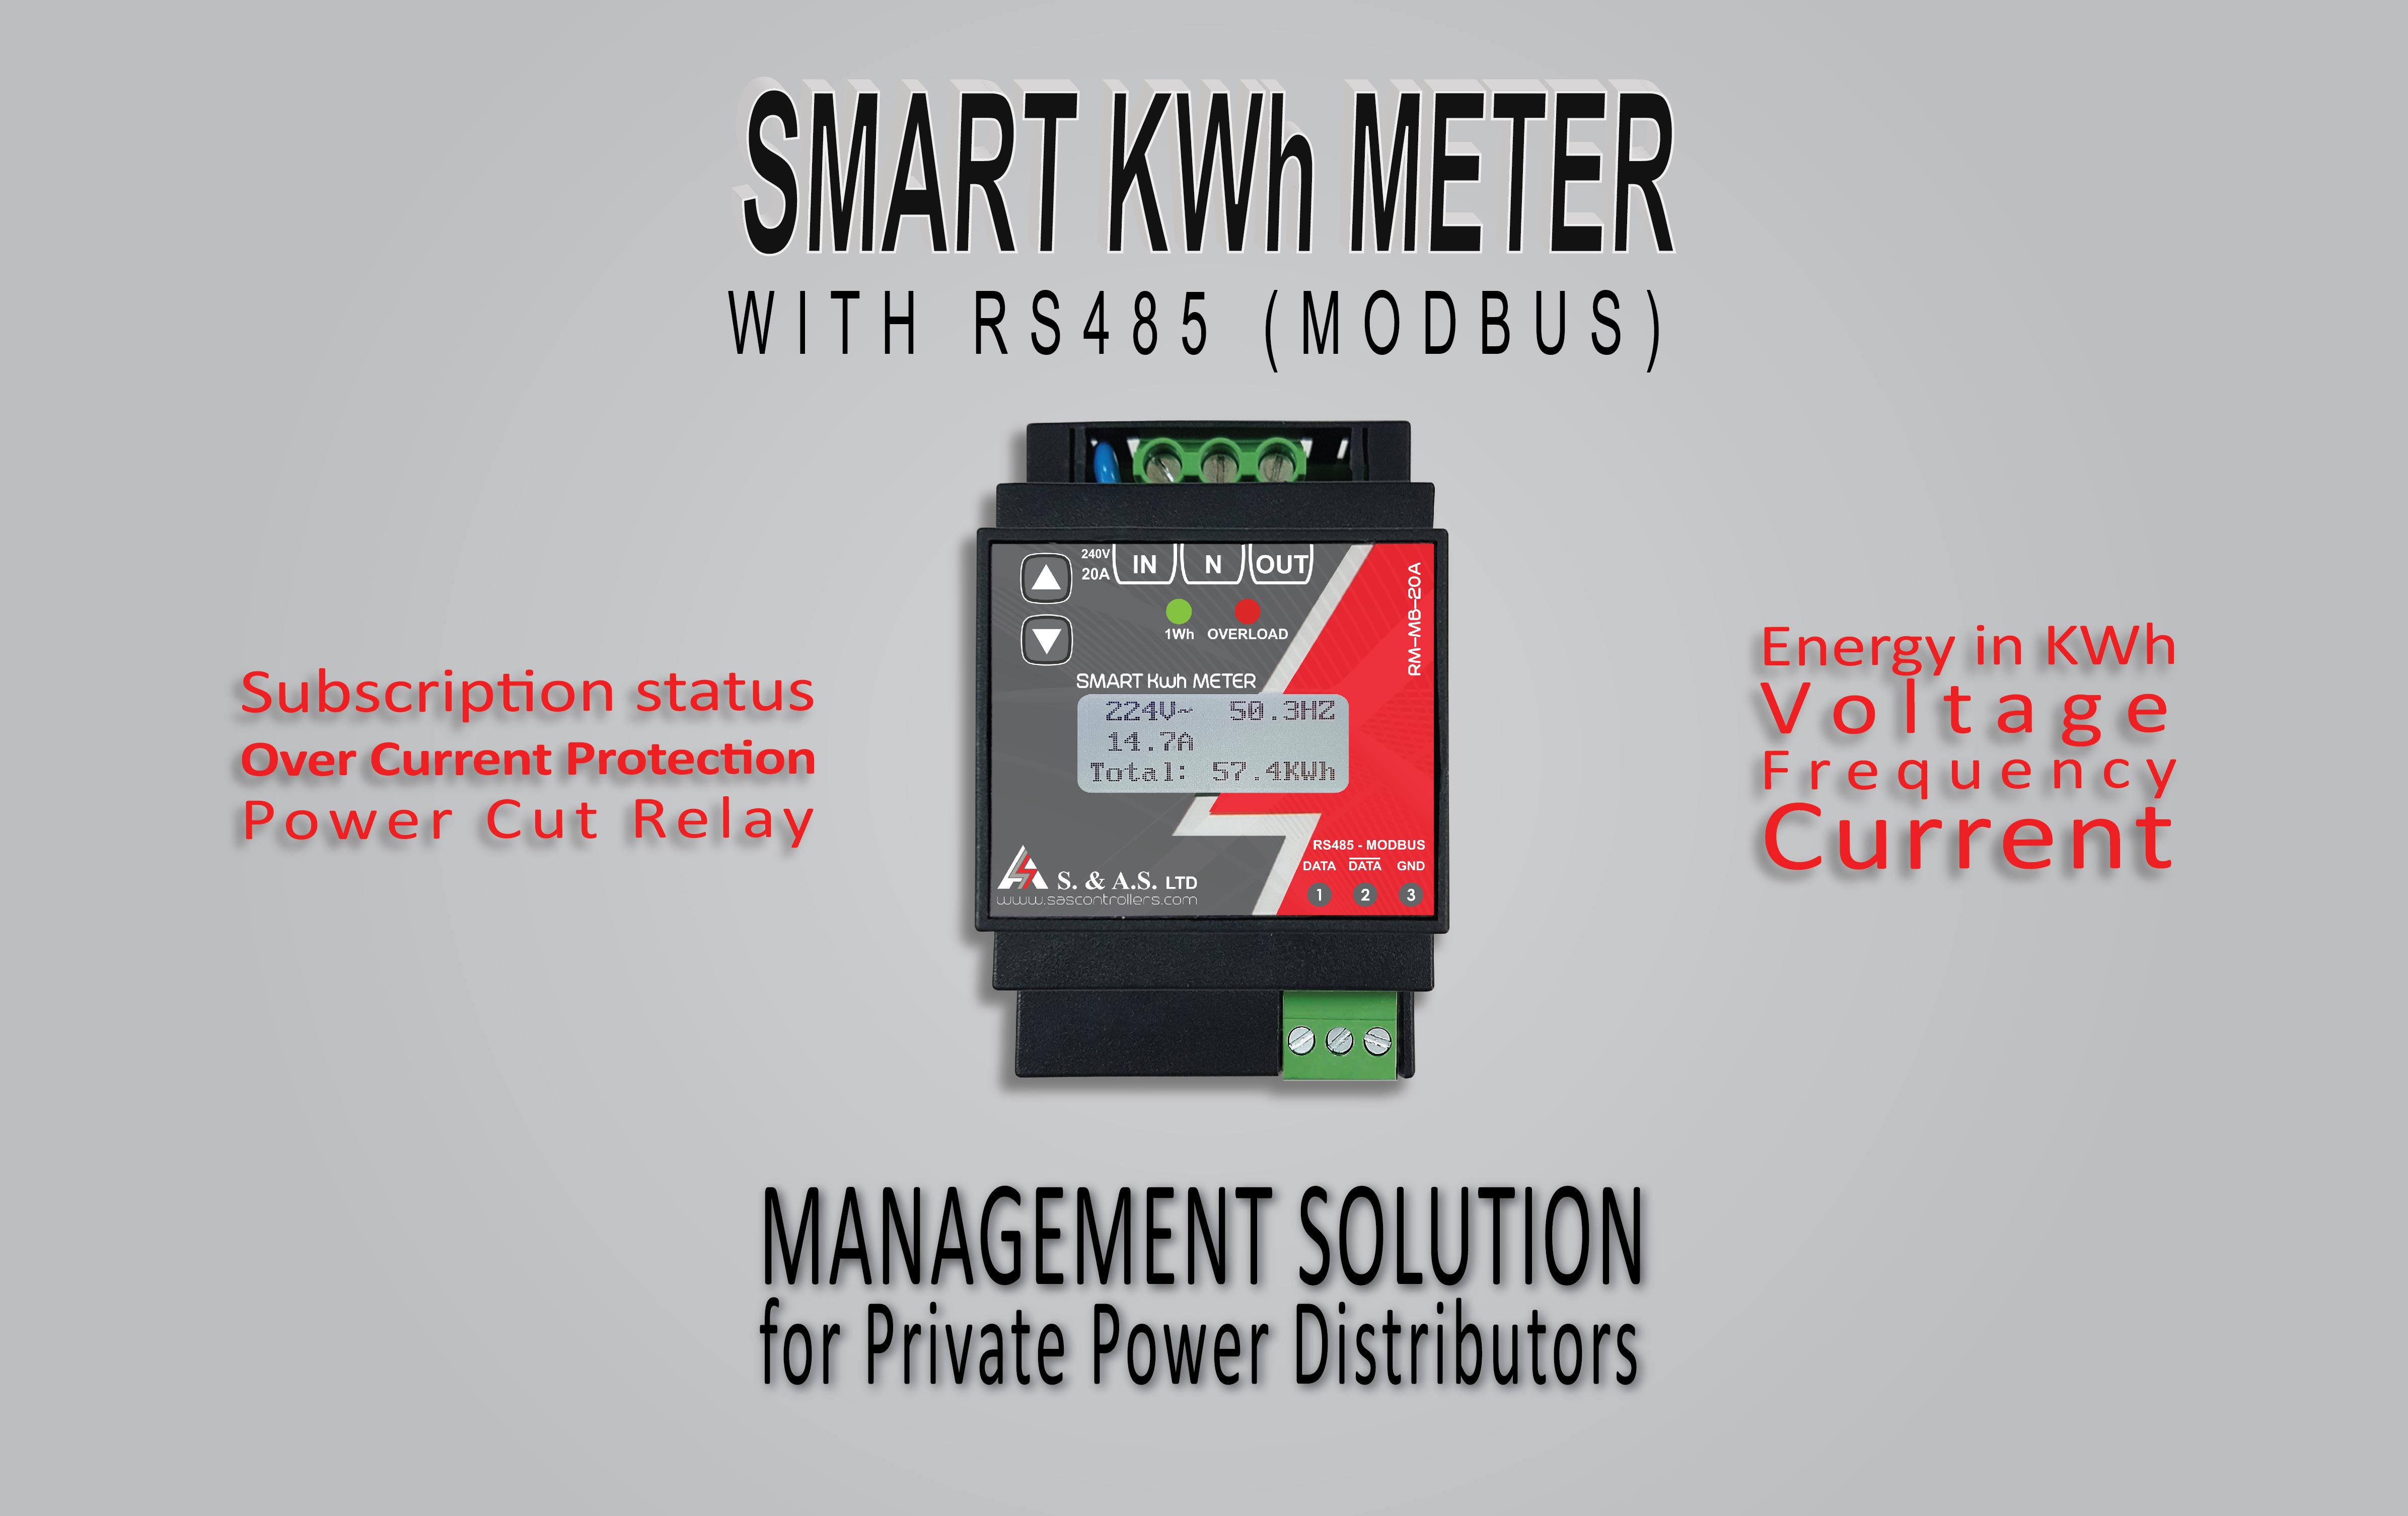 SMART KWHMETER WITH RS485 (MODDBUS)